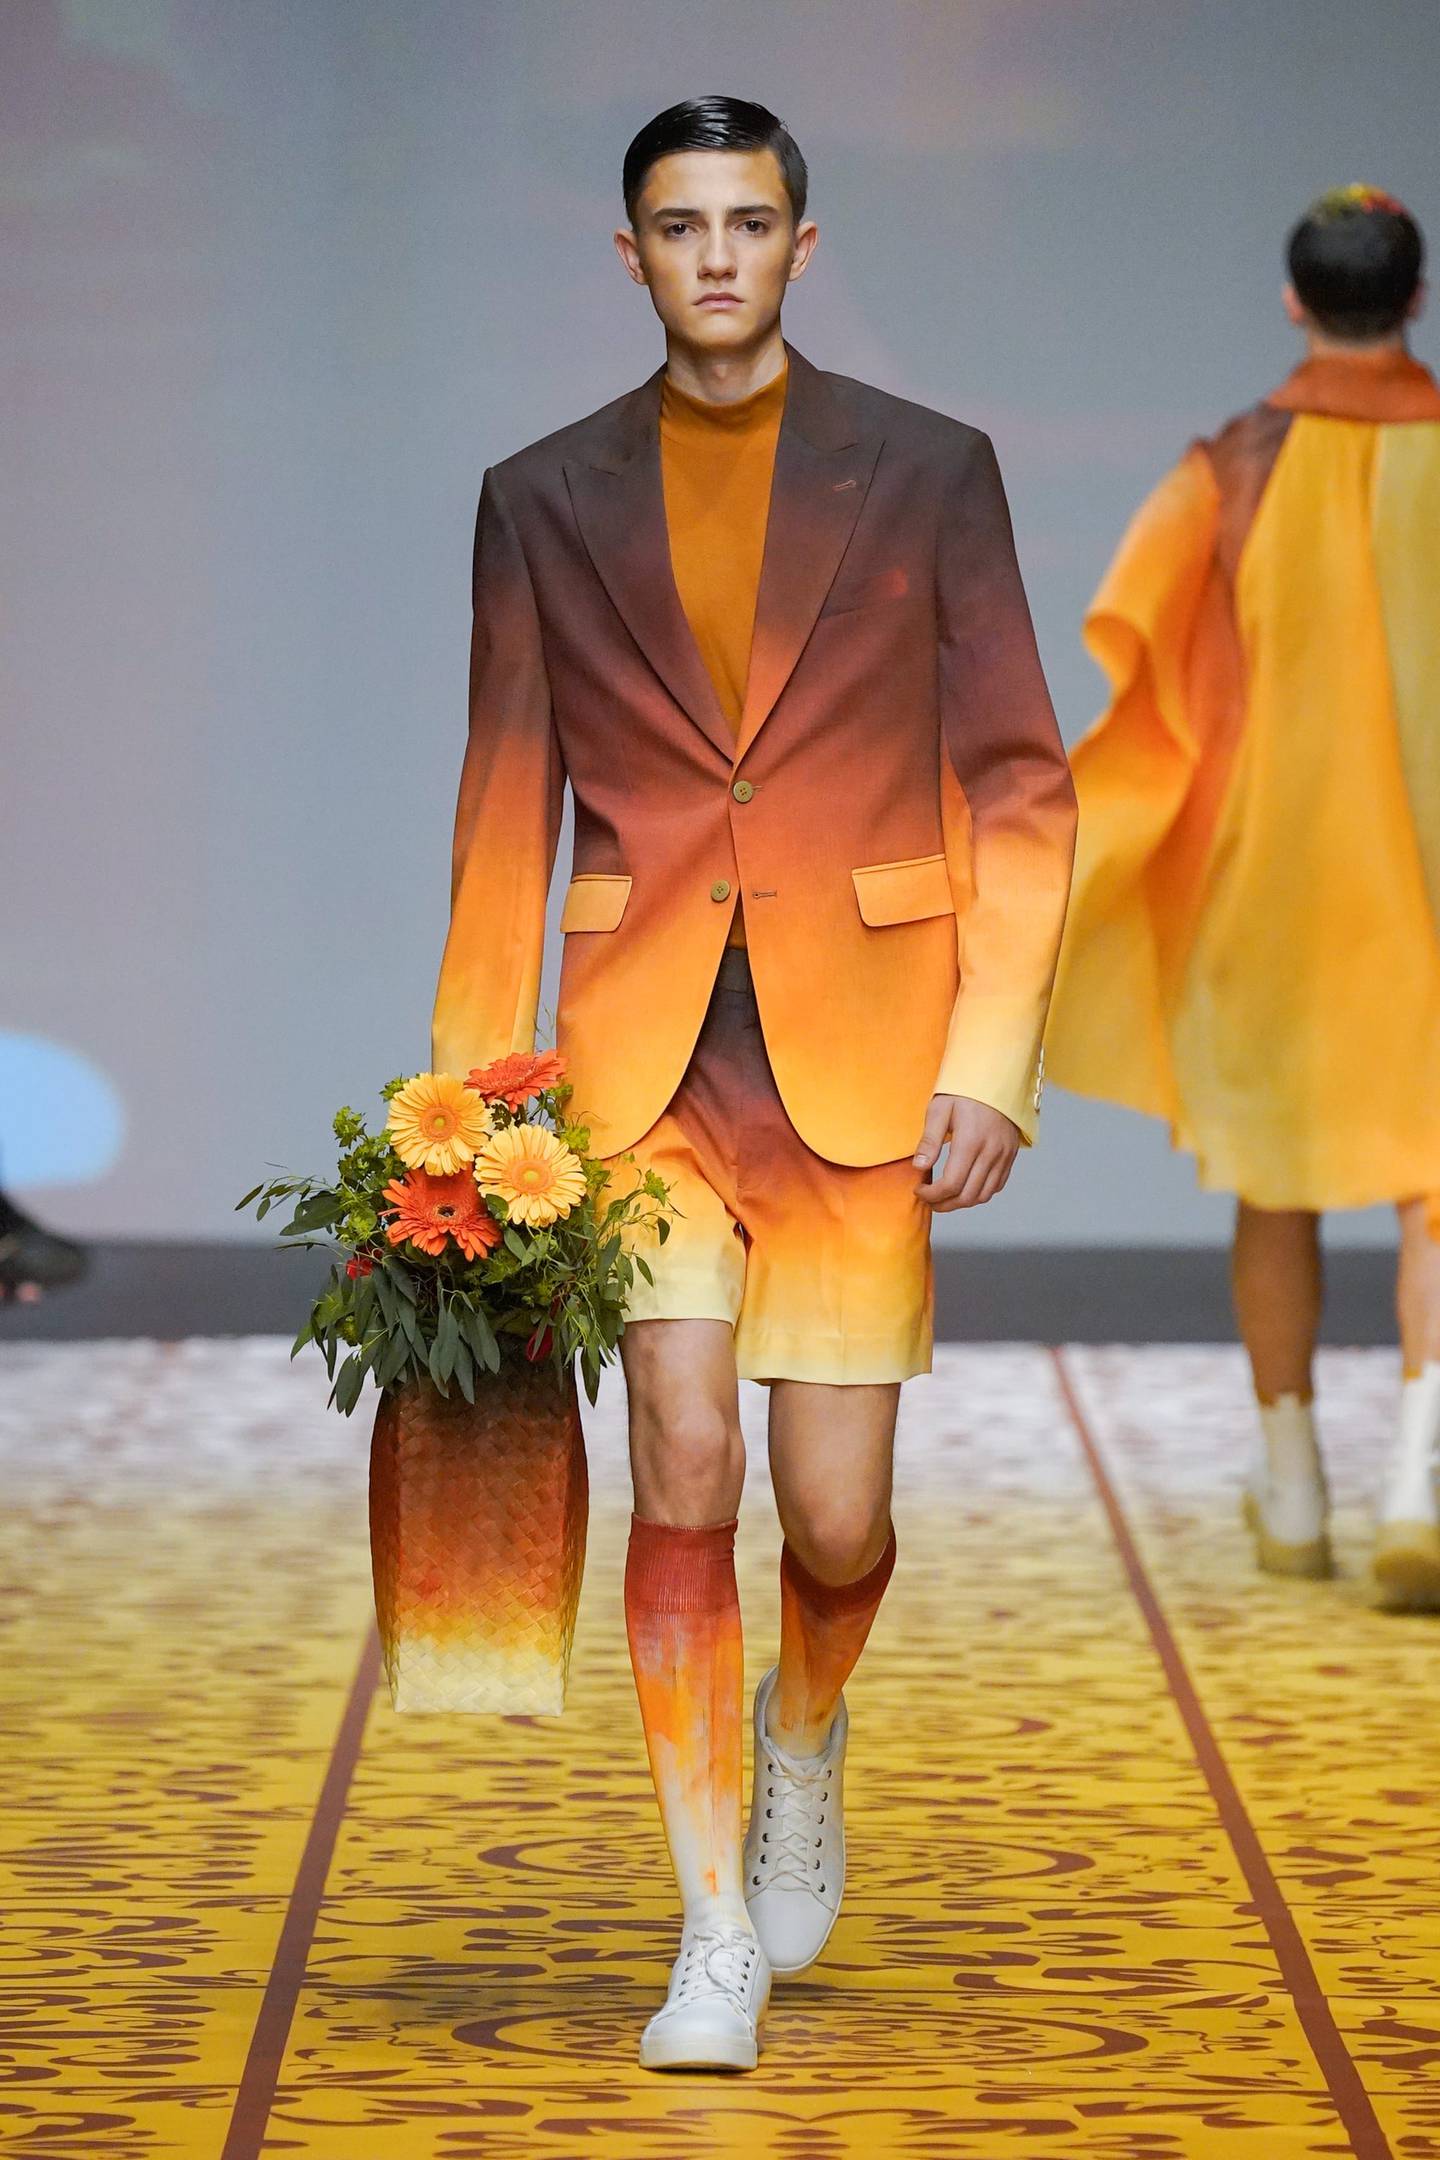 Models carried oversized basket bags filled with flowers. Photo: Michael Cinco